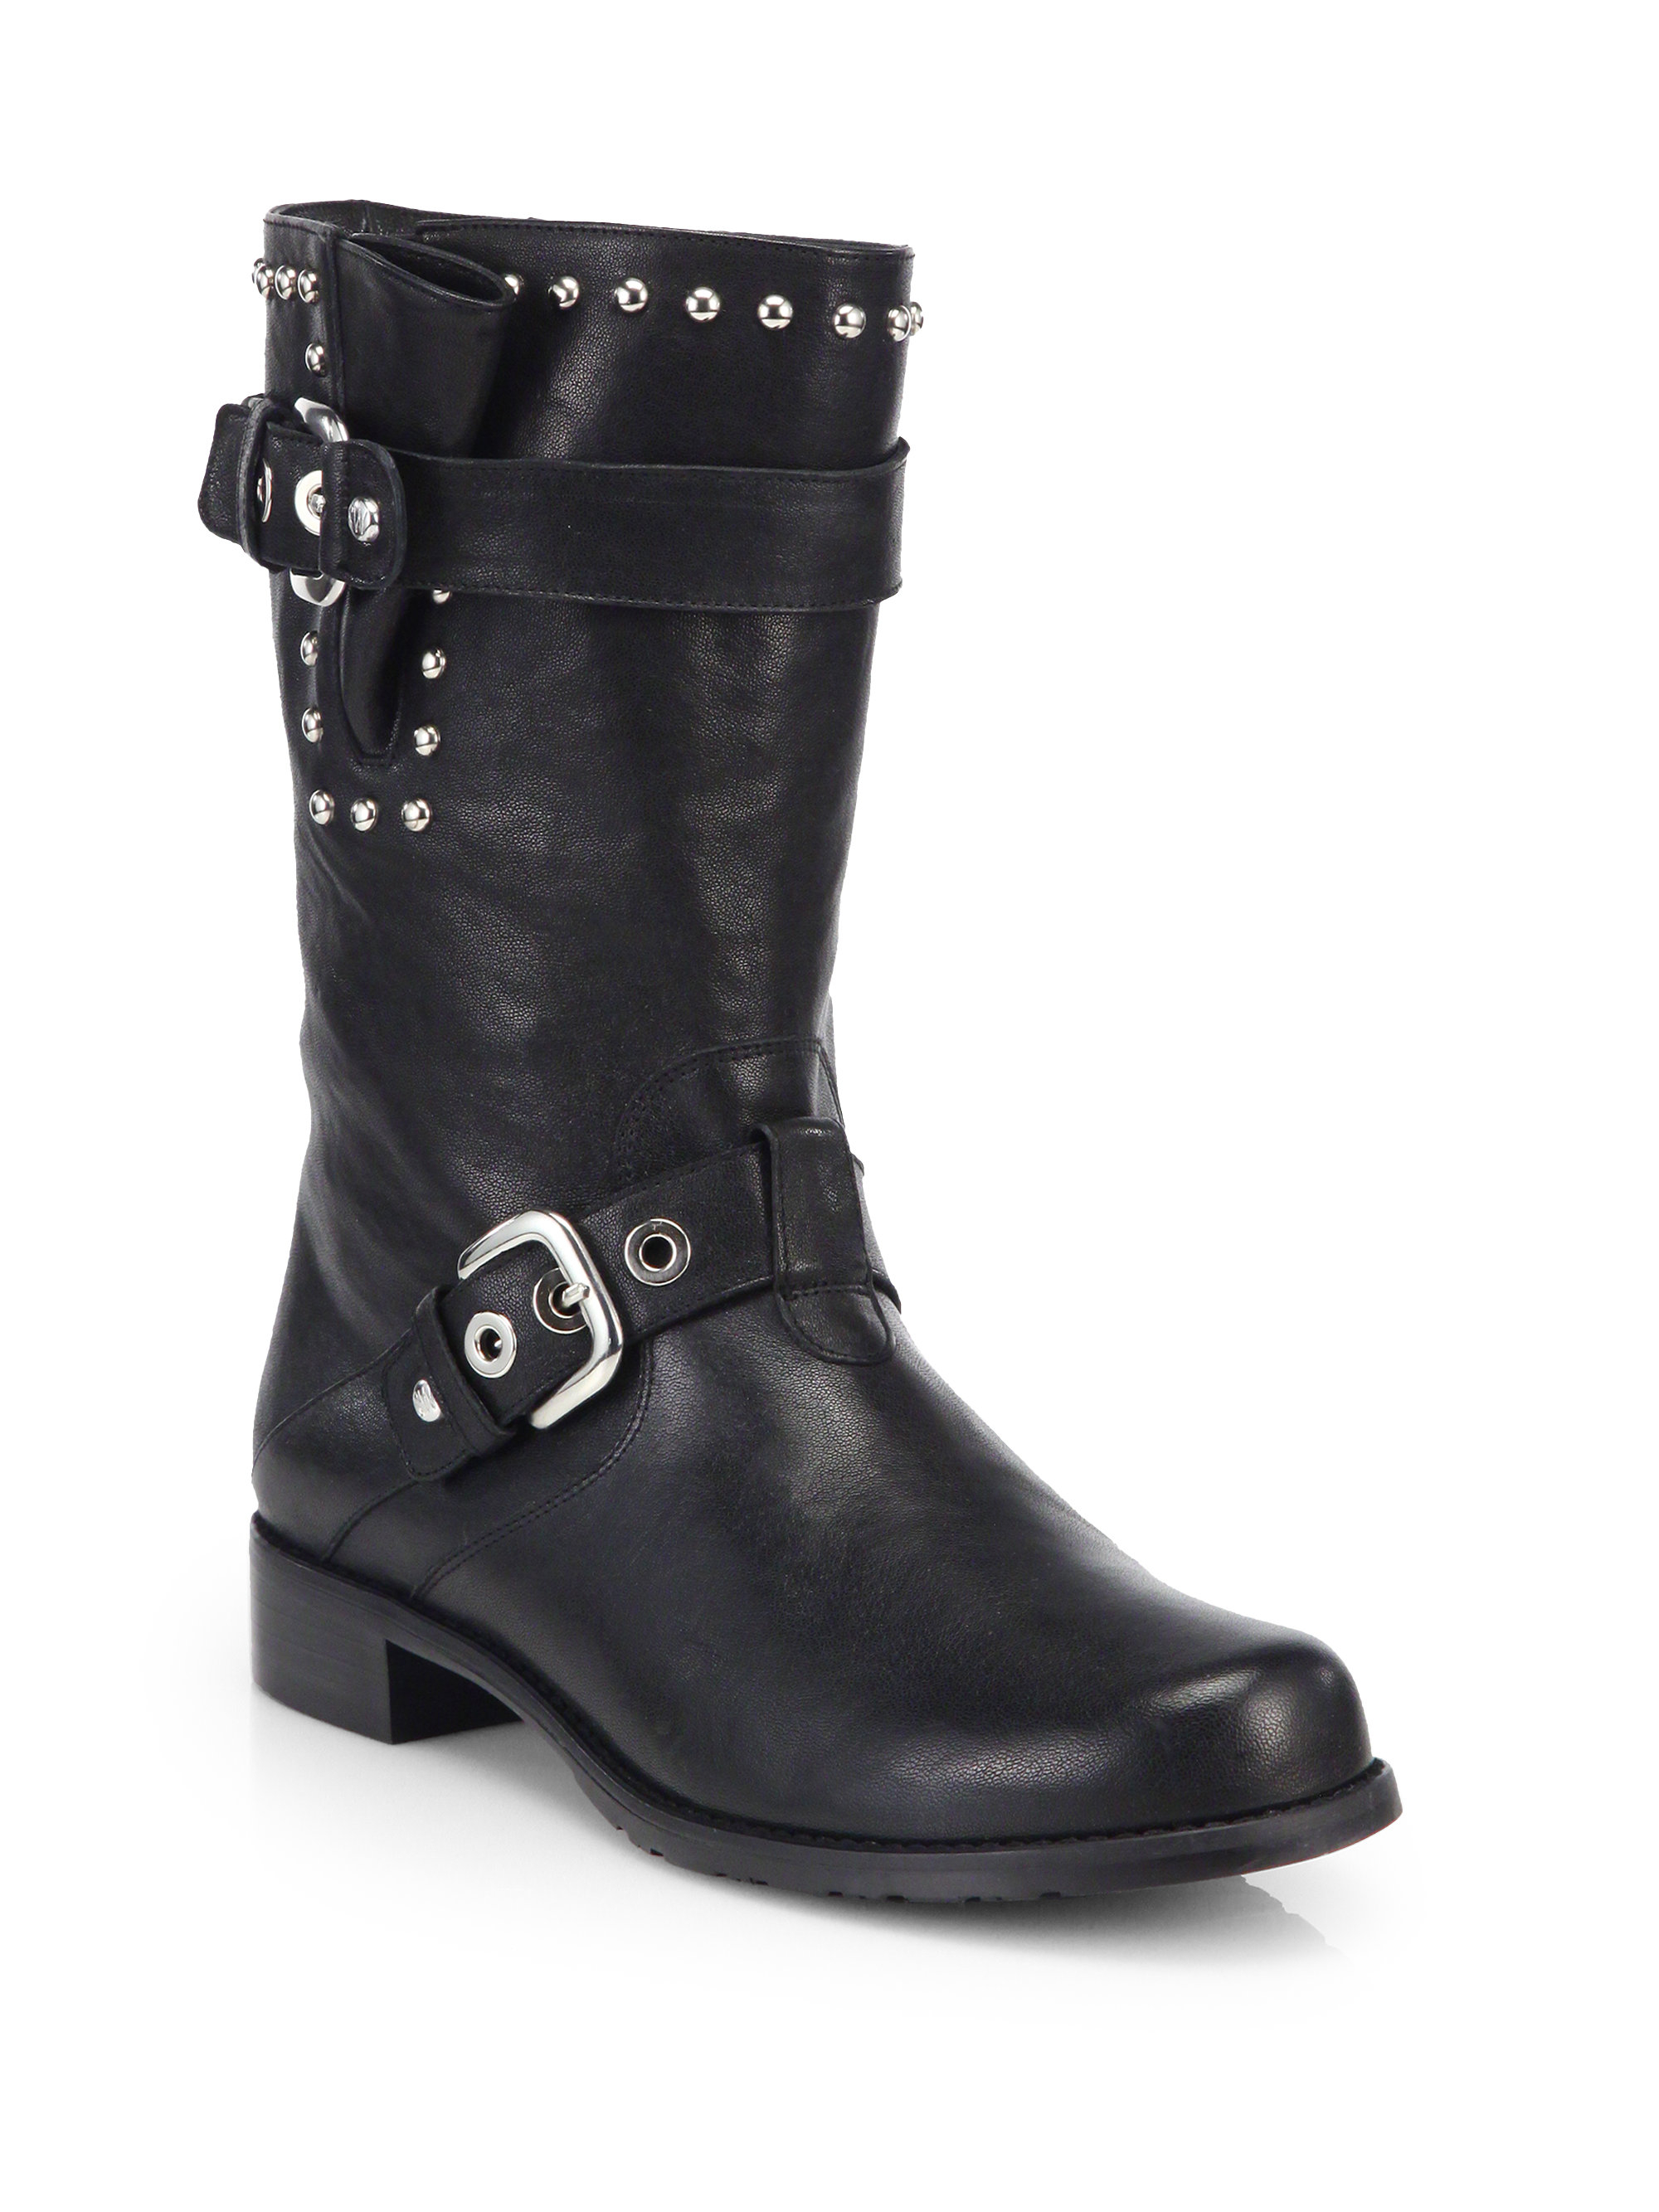 Stuart weitzman Trotter Studded Leather Mid-Calf Boots in Black | Lyst